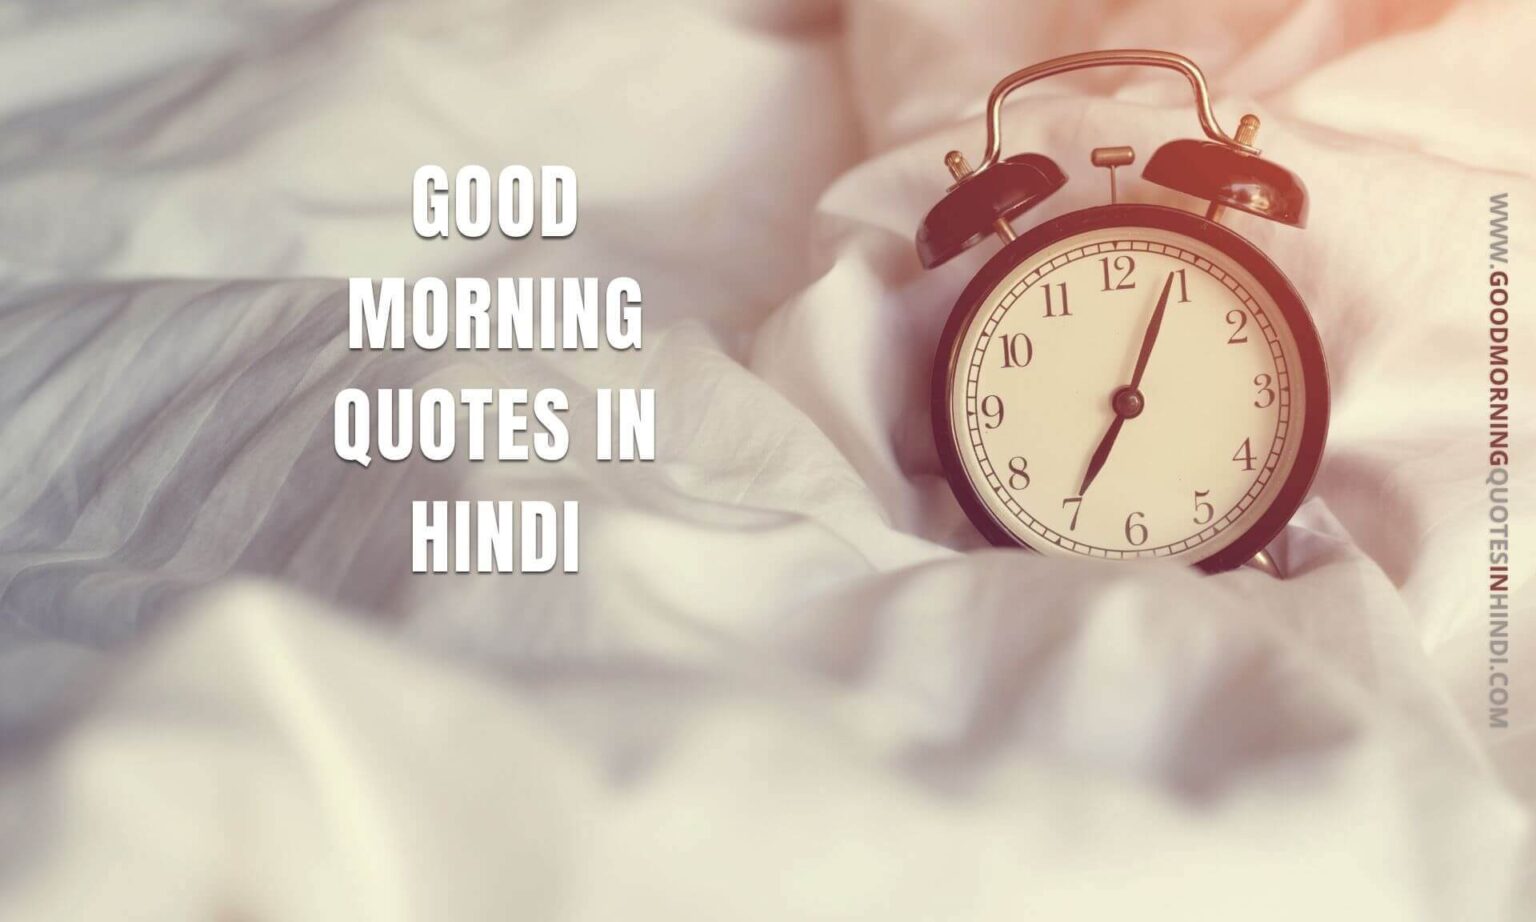 150+ Good morning quotes, wishes, messages, videos and images